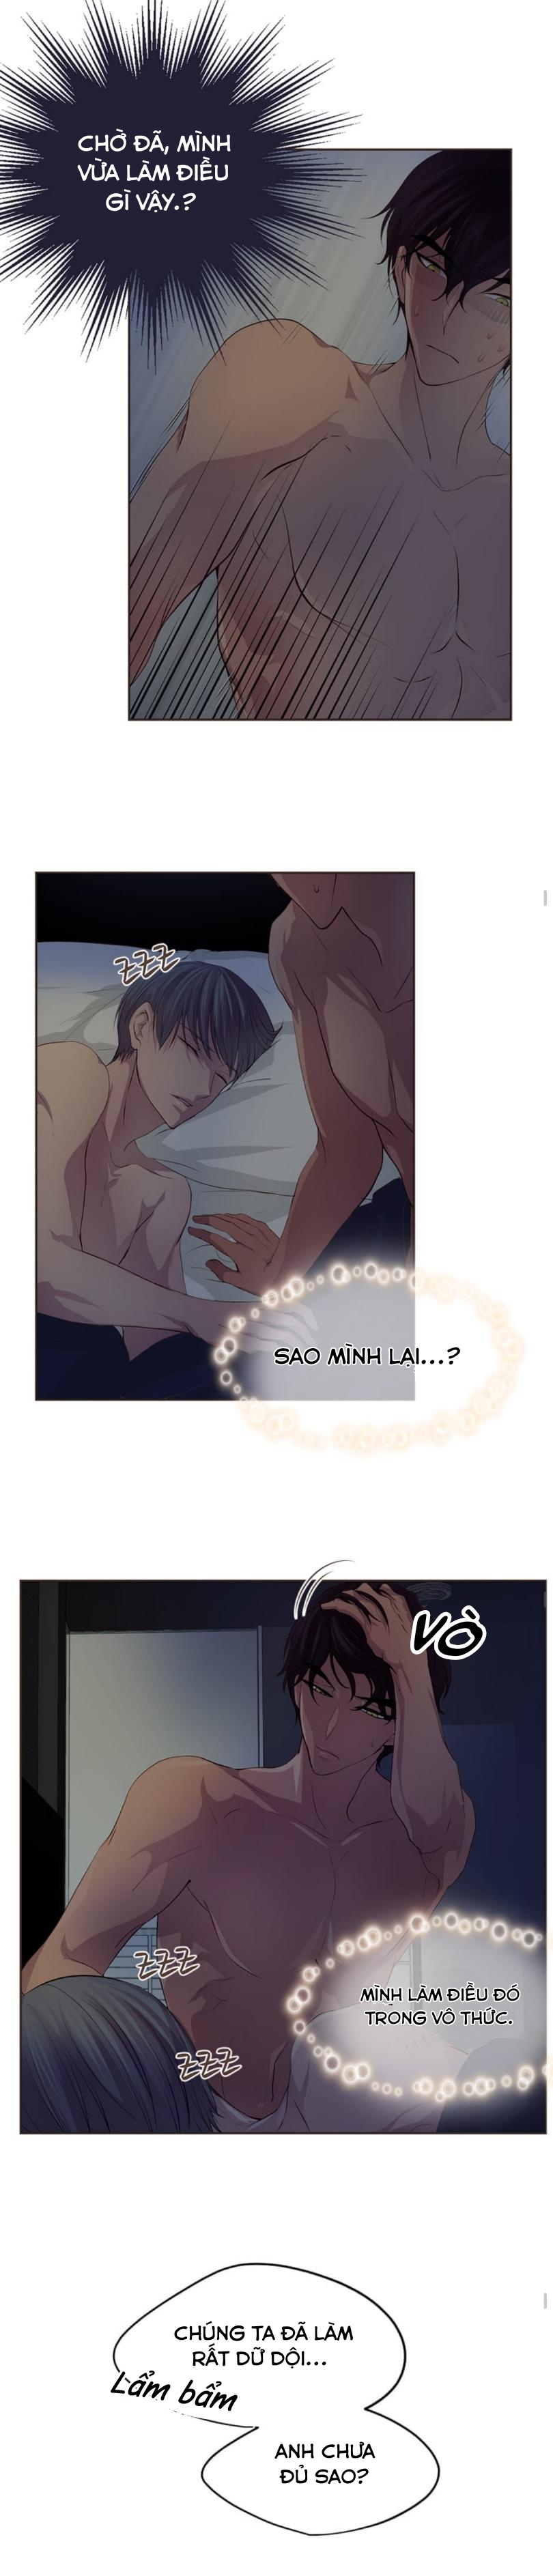 Giữa Em Thật Chặt (Hold Me Tight) Chapter 28 - Trang 7